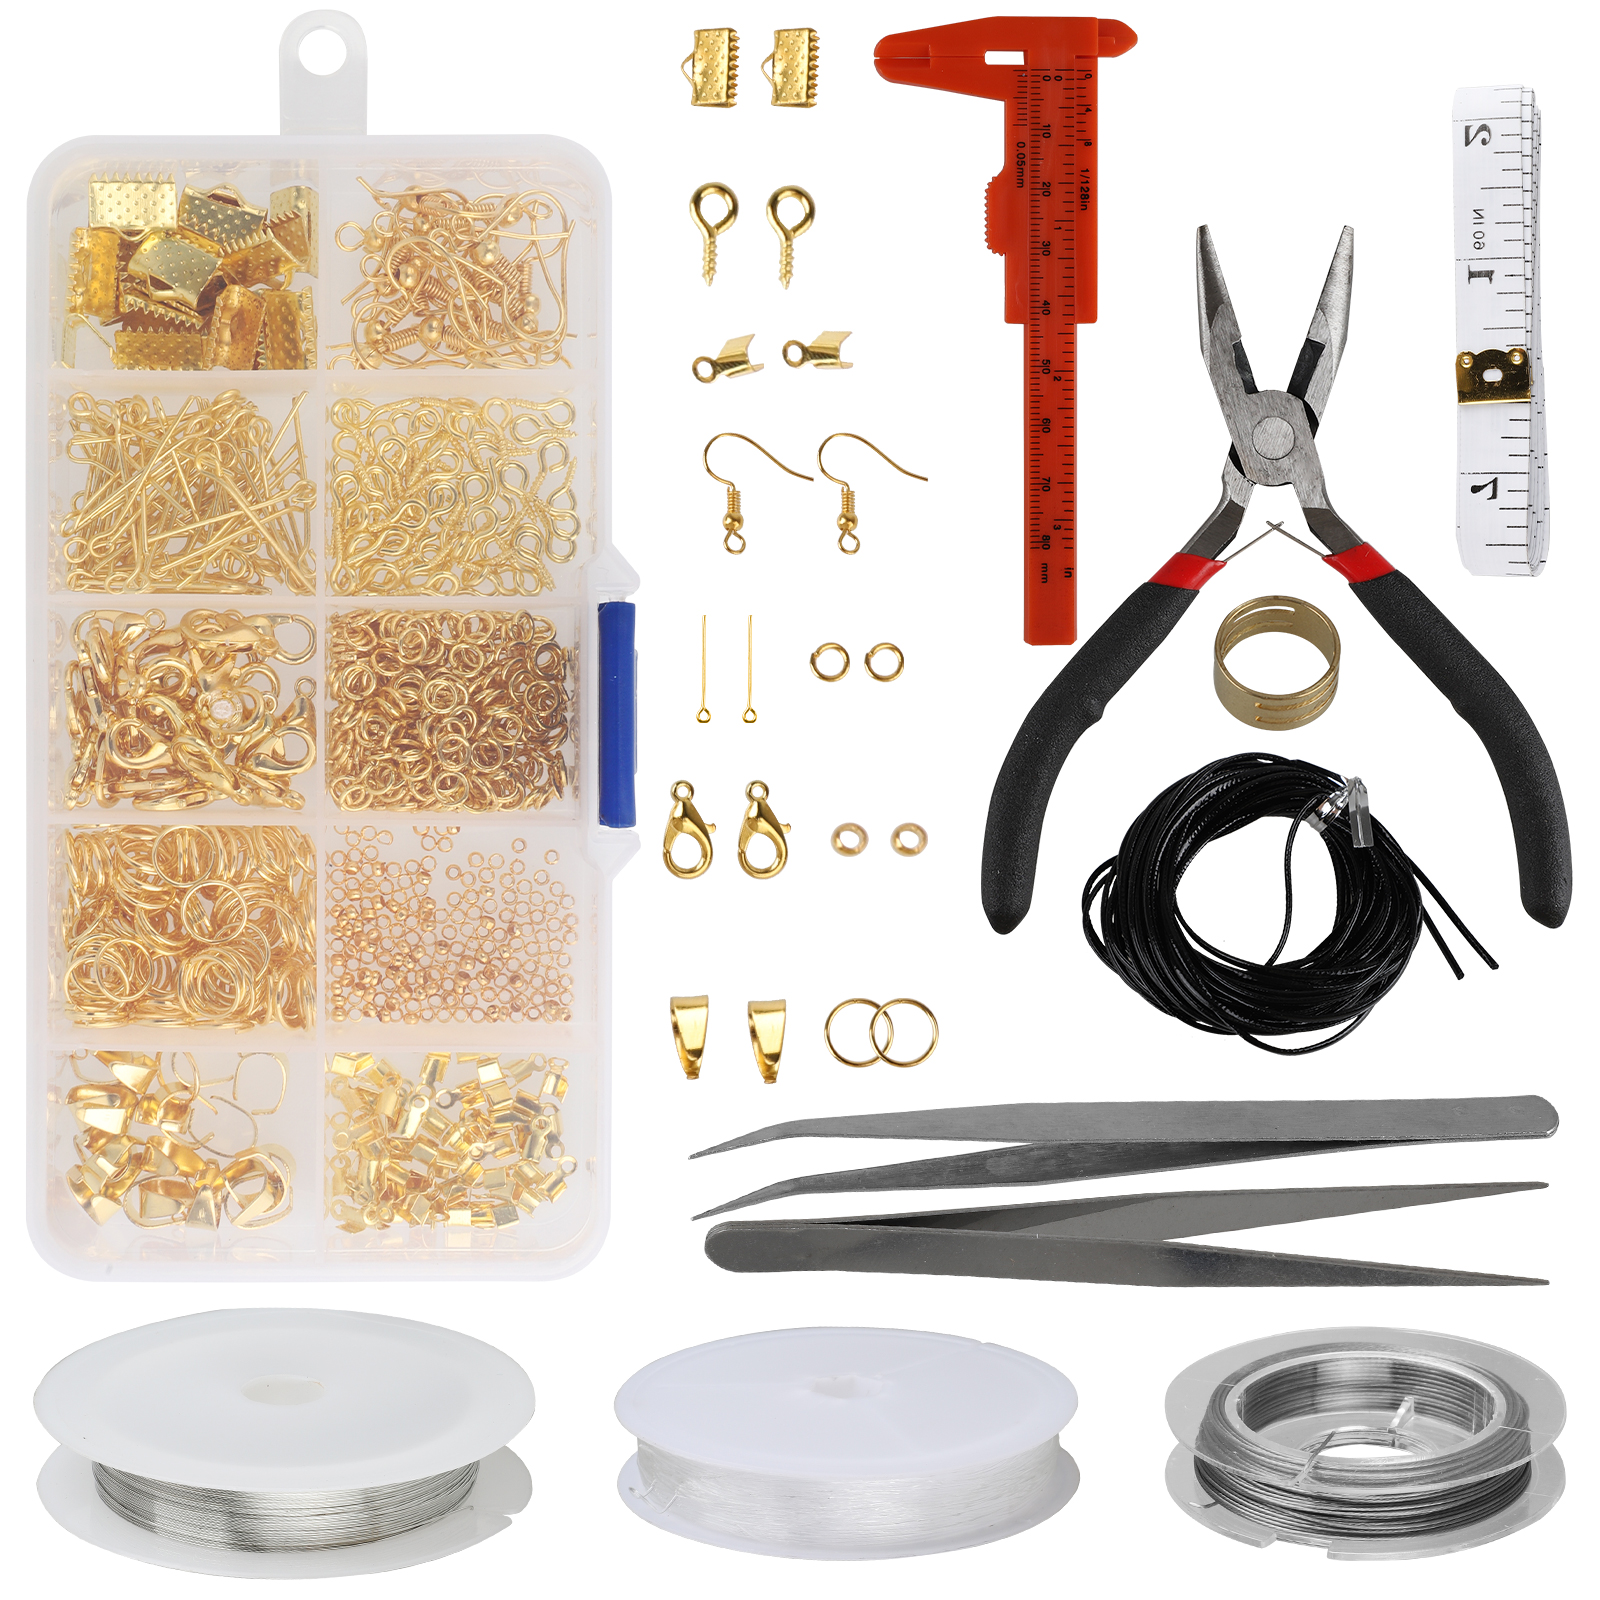  LZKW Jewelry Making Tool Kit, Earring DIY Kit Safe and